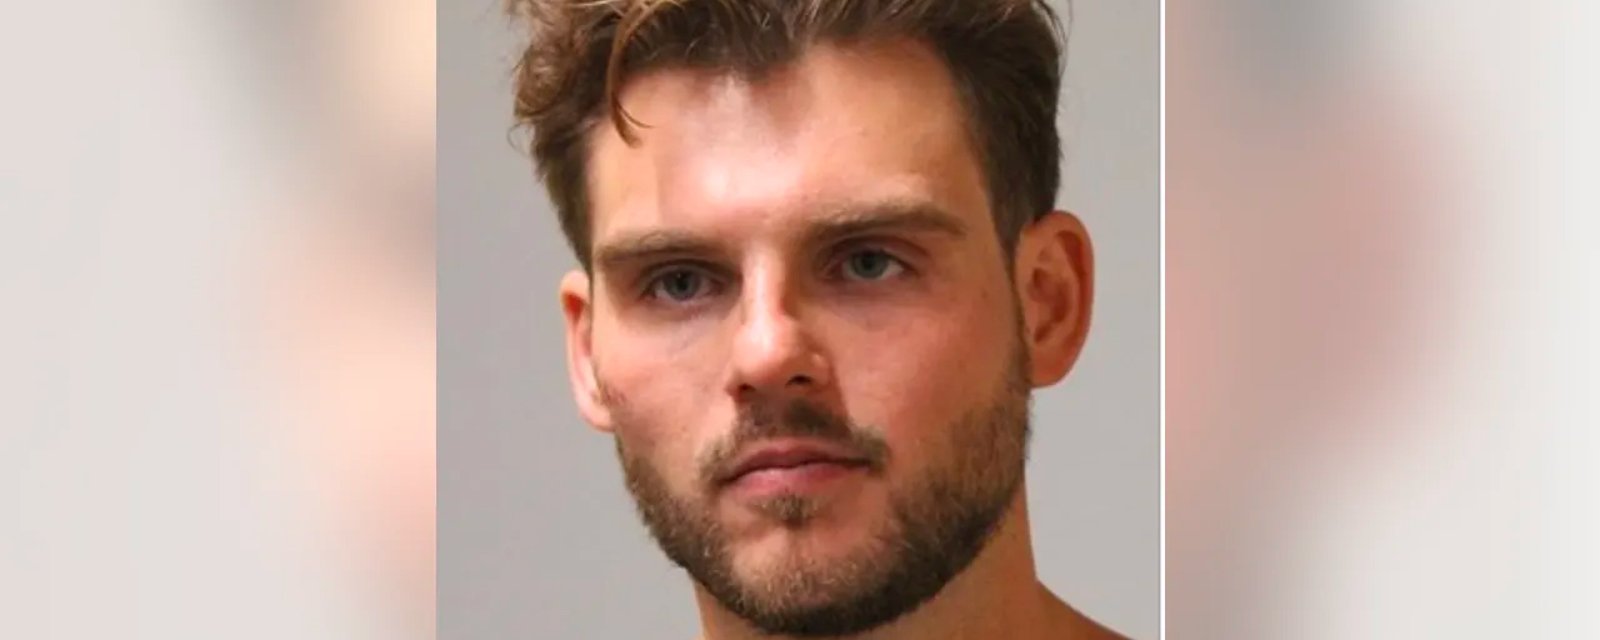 Police report: Scary details from Galchenyuk’s arrest emerge and reveal appalling threats!